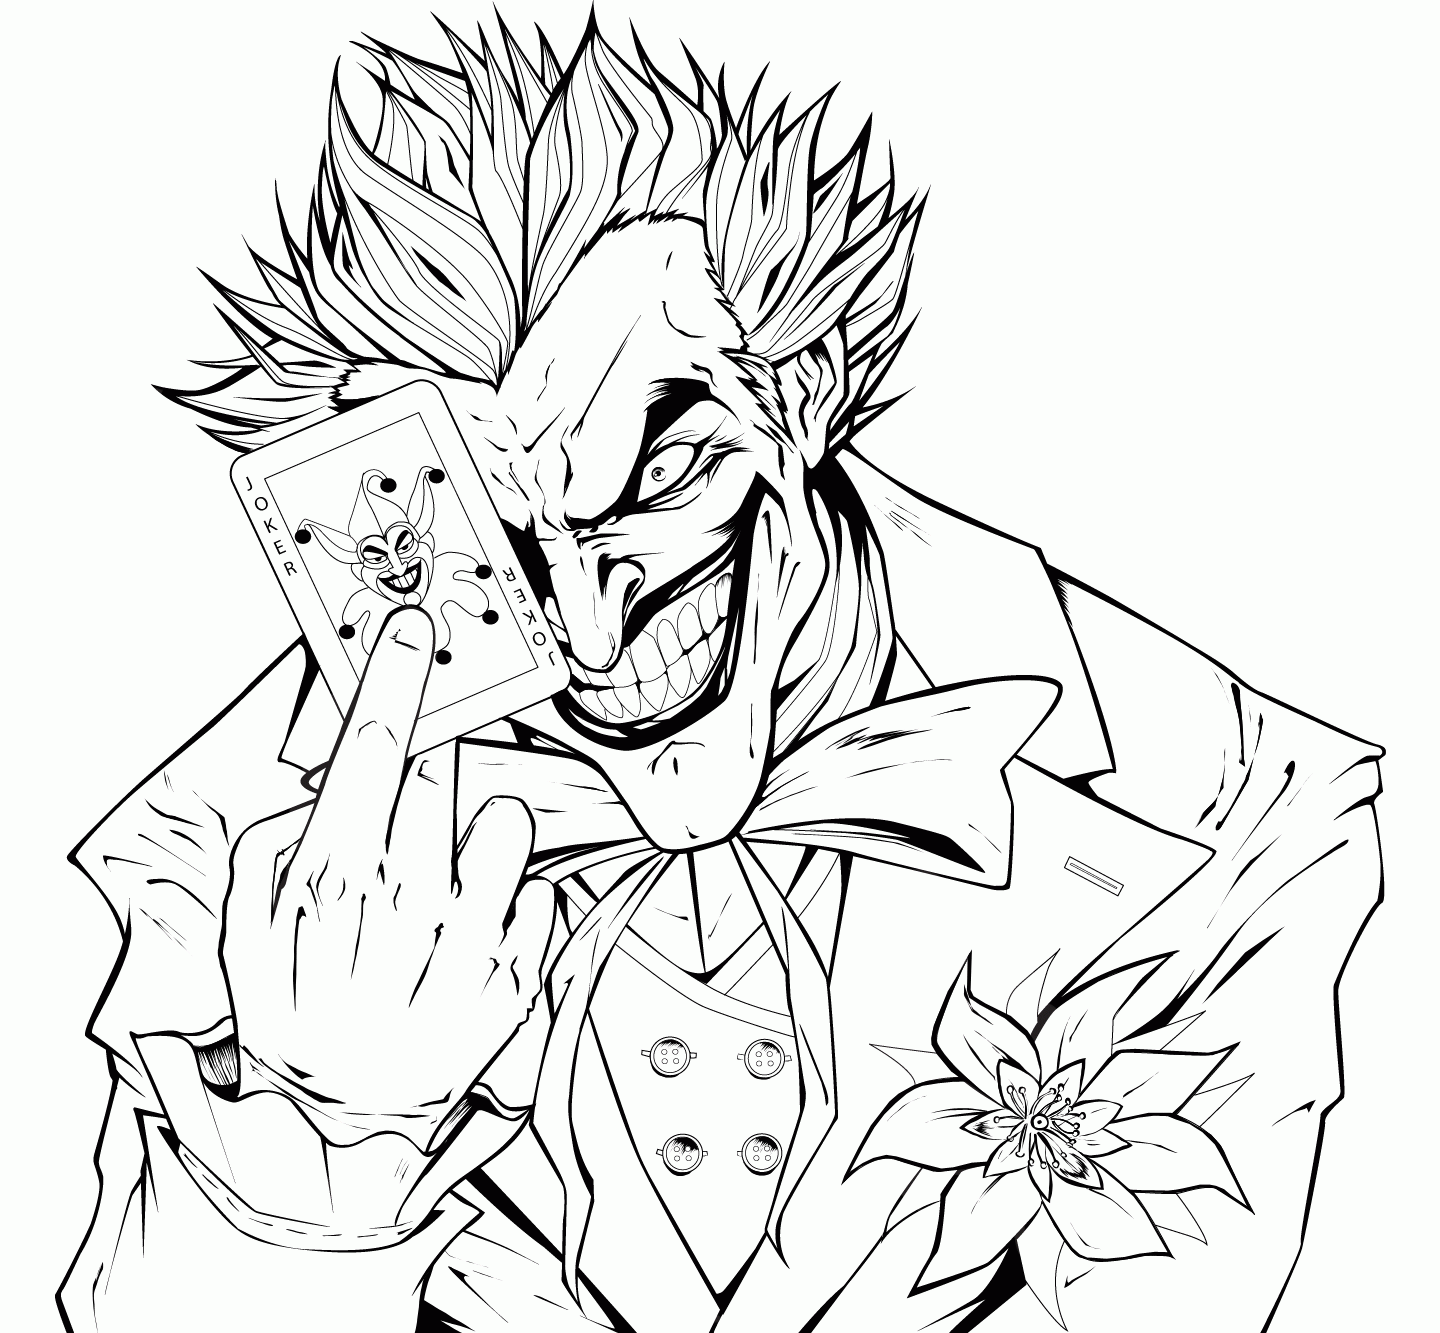 180 Cute Joker Coloring Pages To Print for Kids